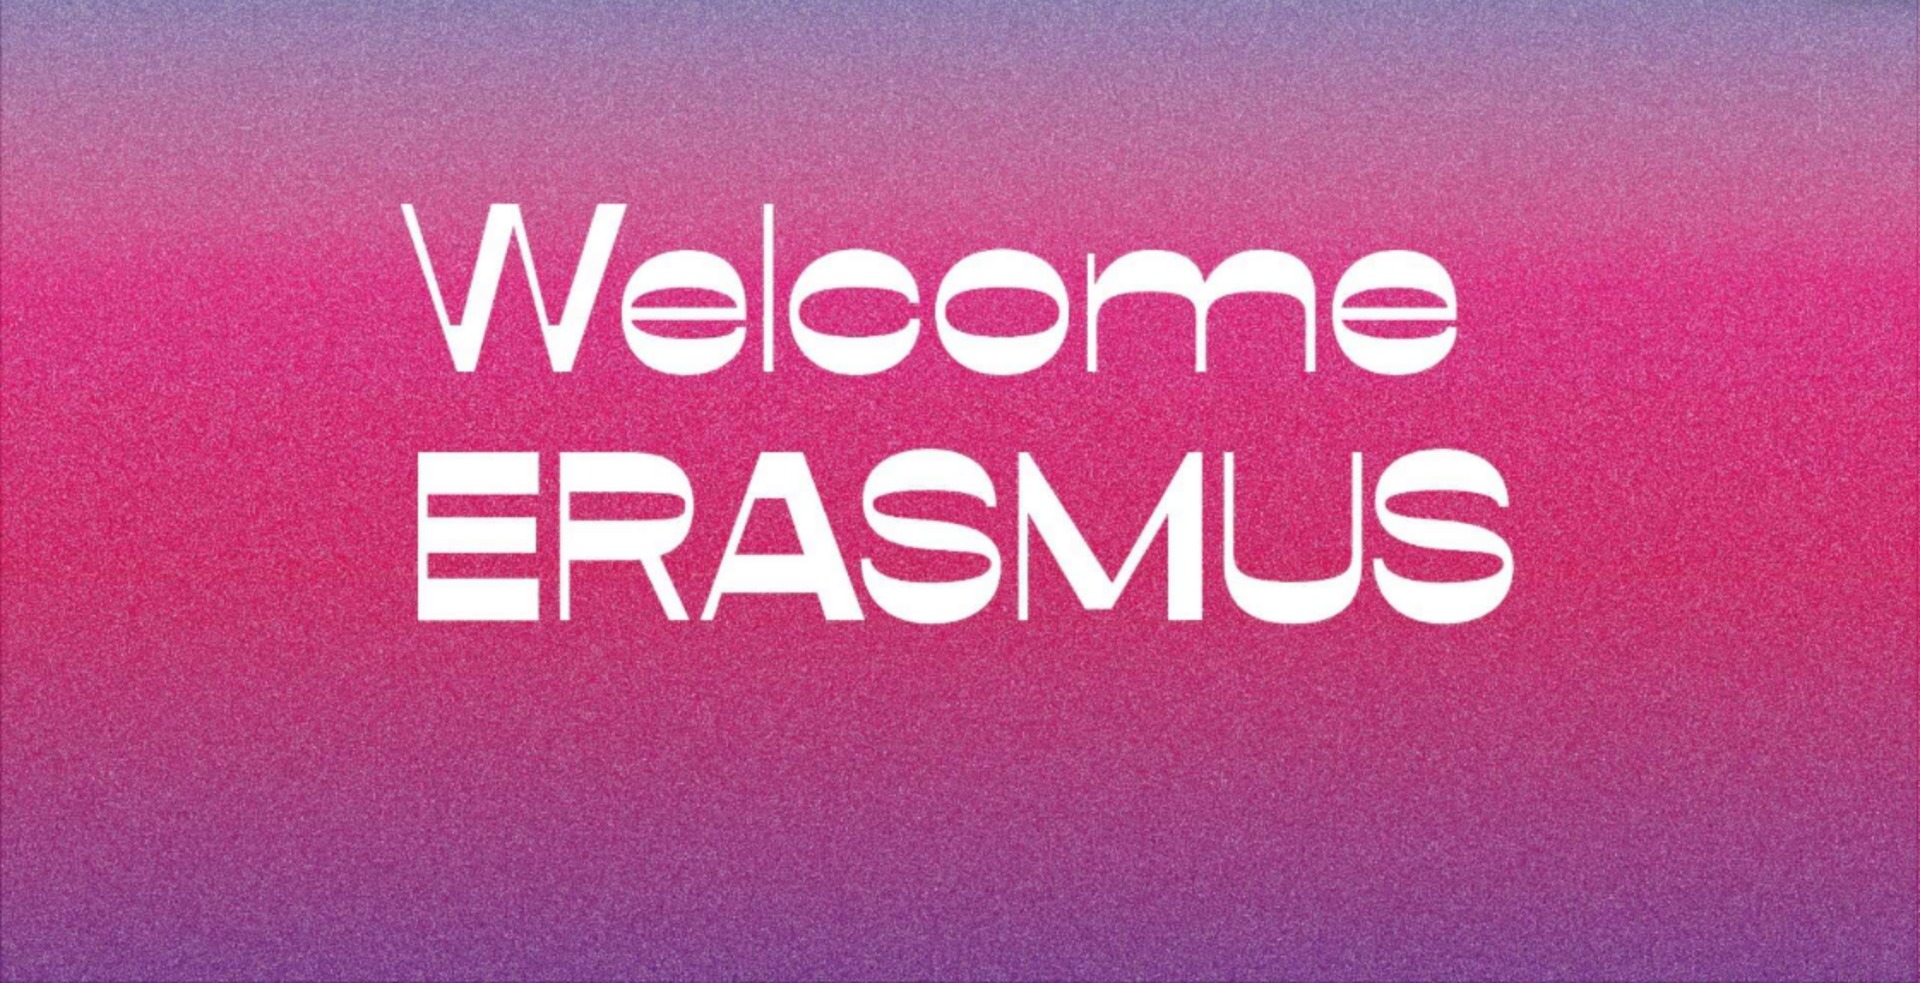 Welcome ERASMUS at Nada Temple